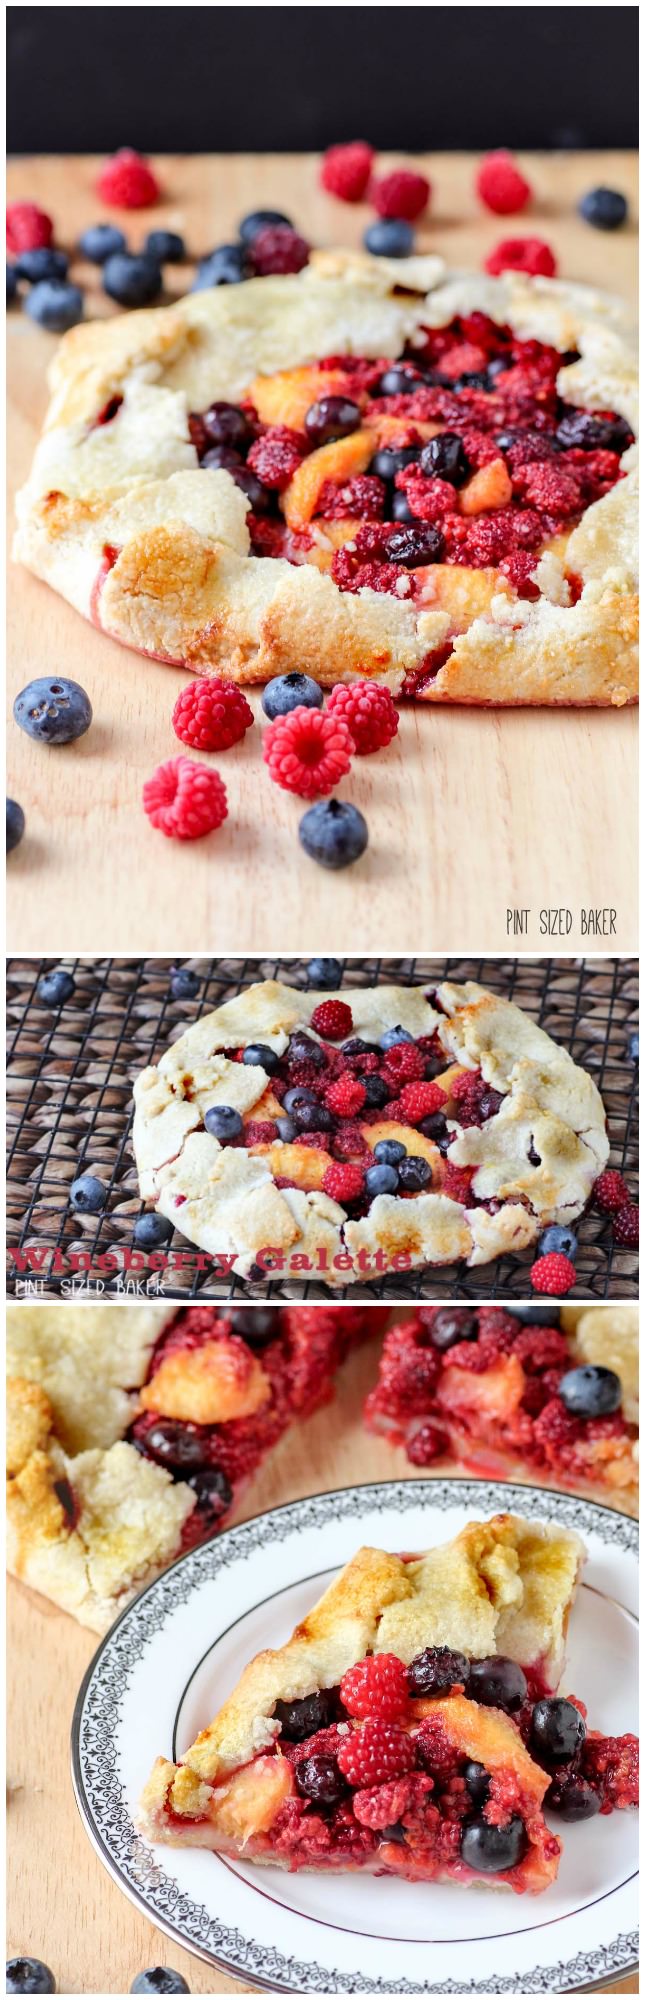 A sweet cousin to raspberries, Wineberries are smaller, sweeter, and the seeds won't get stuck in your teeth. Makes the perfect Wineberry Galette!